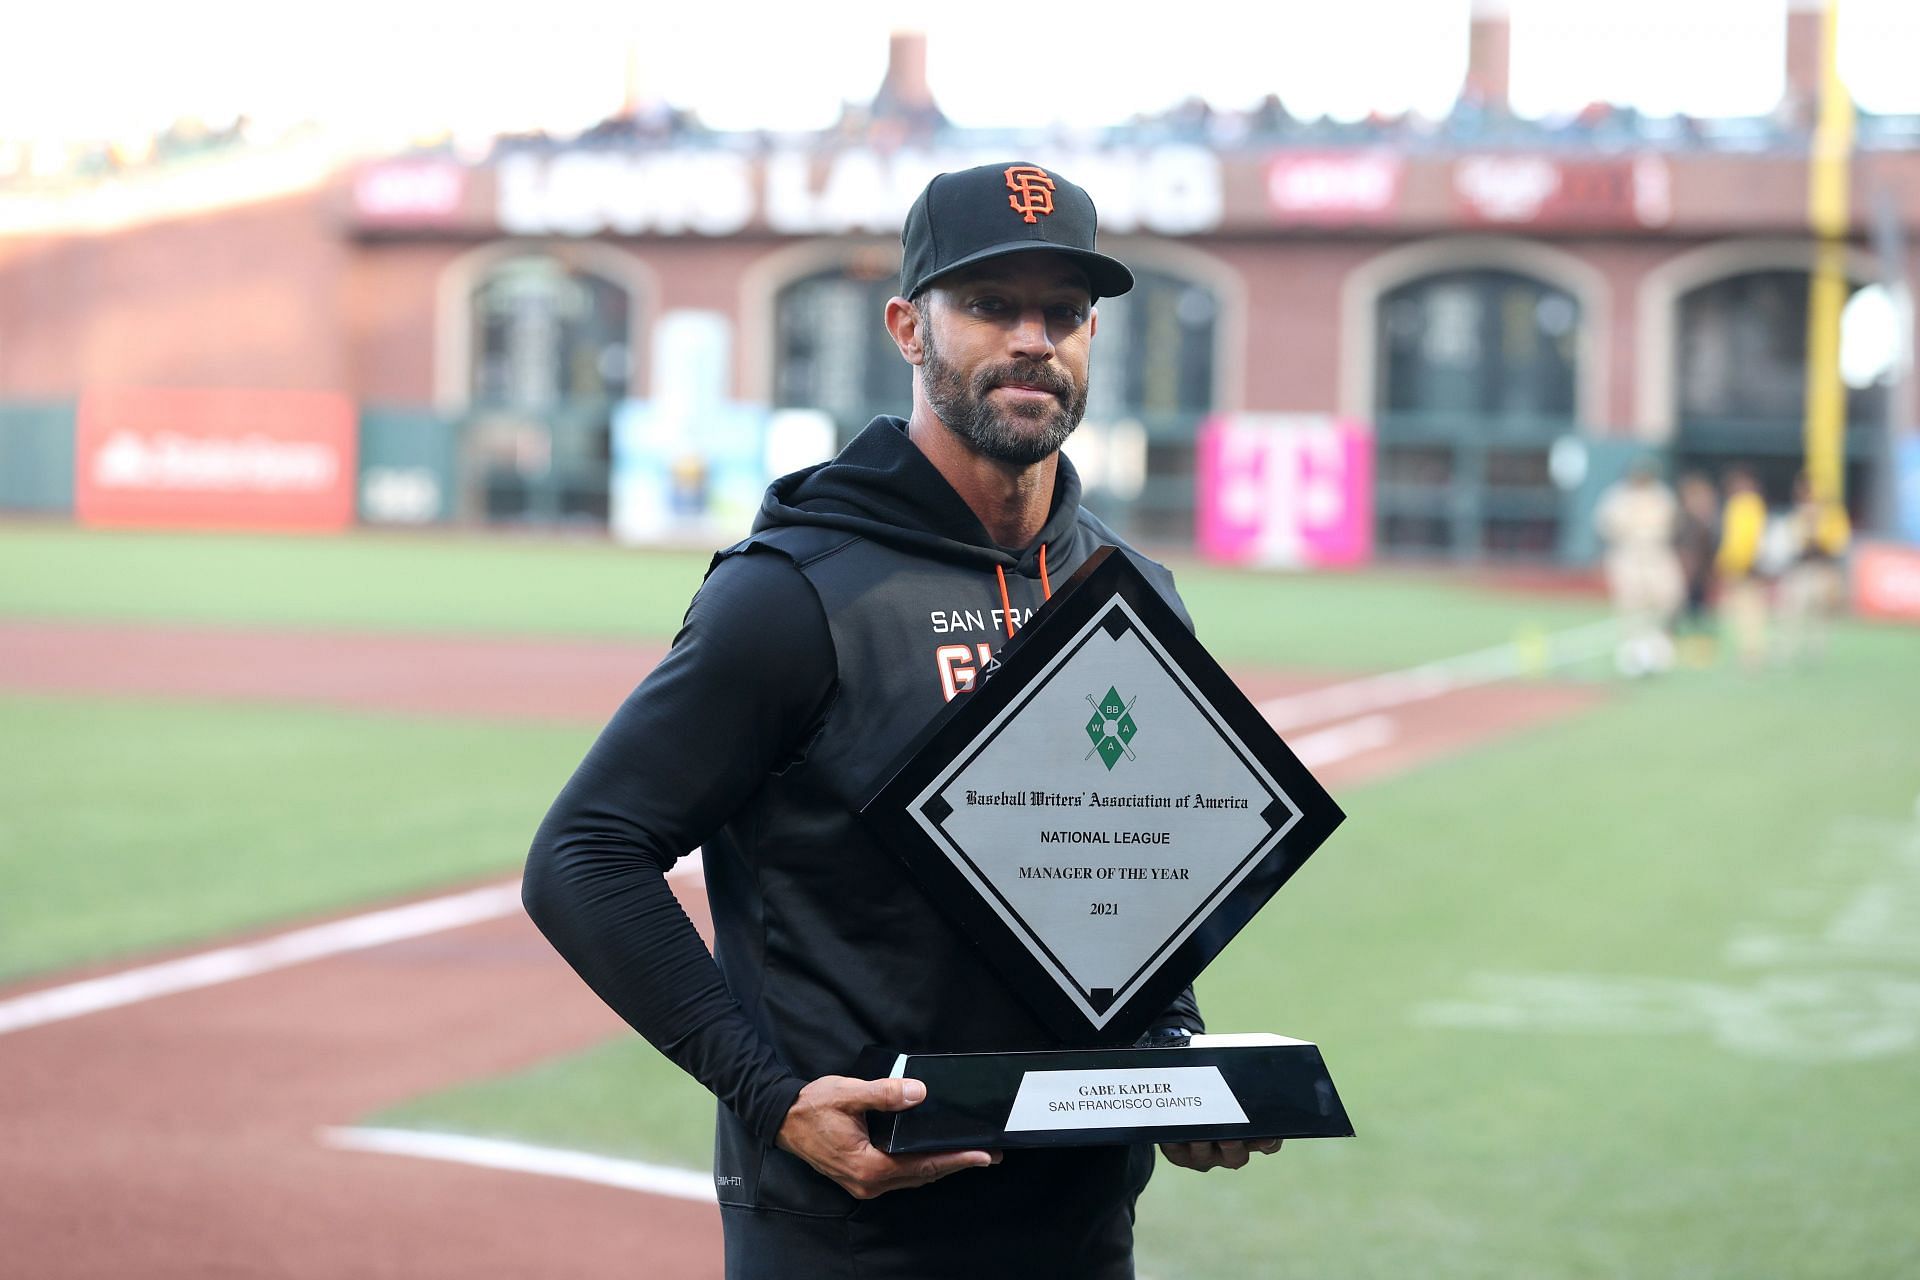 Foundational piece: How Giants' Gabe Kapler and a unique co-director seek  change - The Athletic